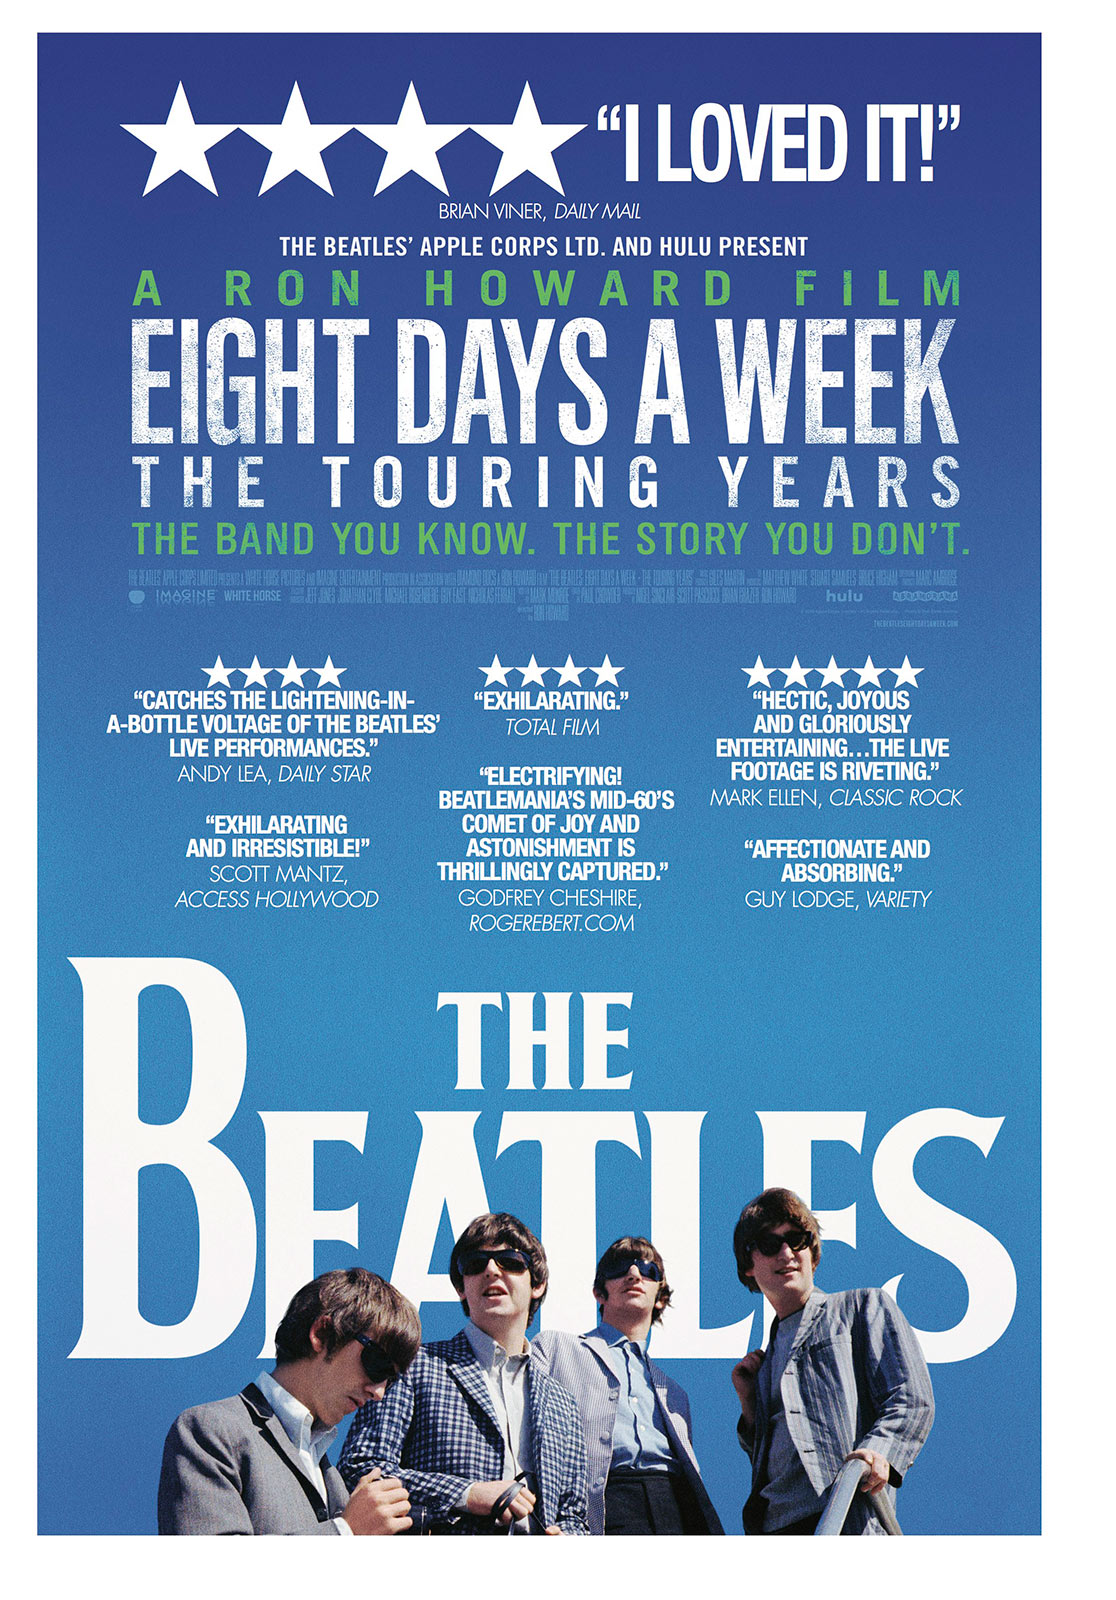 PBS Broadcast Premiere Of Ron Howard’s Acclaimed THE BEATLES: EIGHT DAYS A WEEK – THE TOURING YEARS